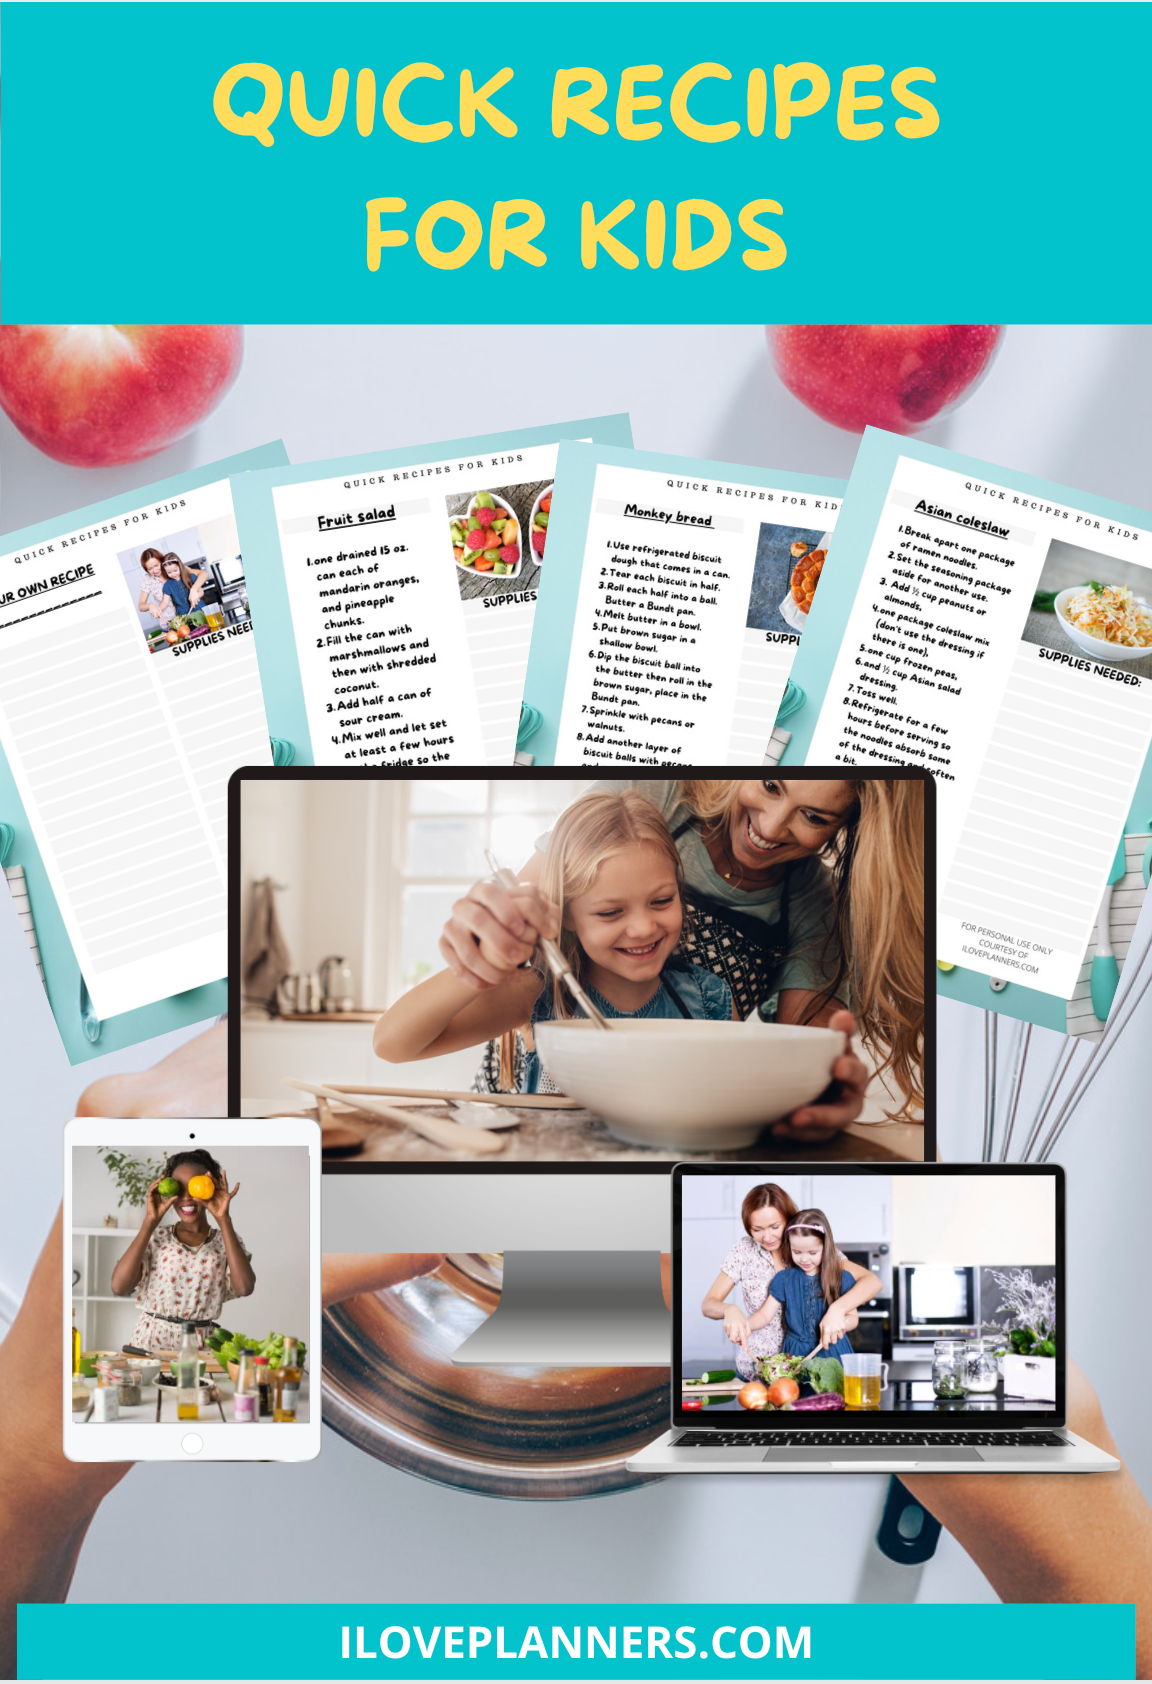 Quick Recipes For Kids, Family, Family Activities, Kids Activities, and More. Print It Yourself, DIY, Instant Download, Printable, Digital Download